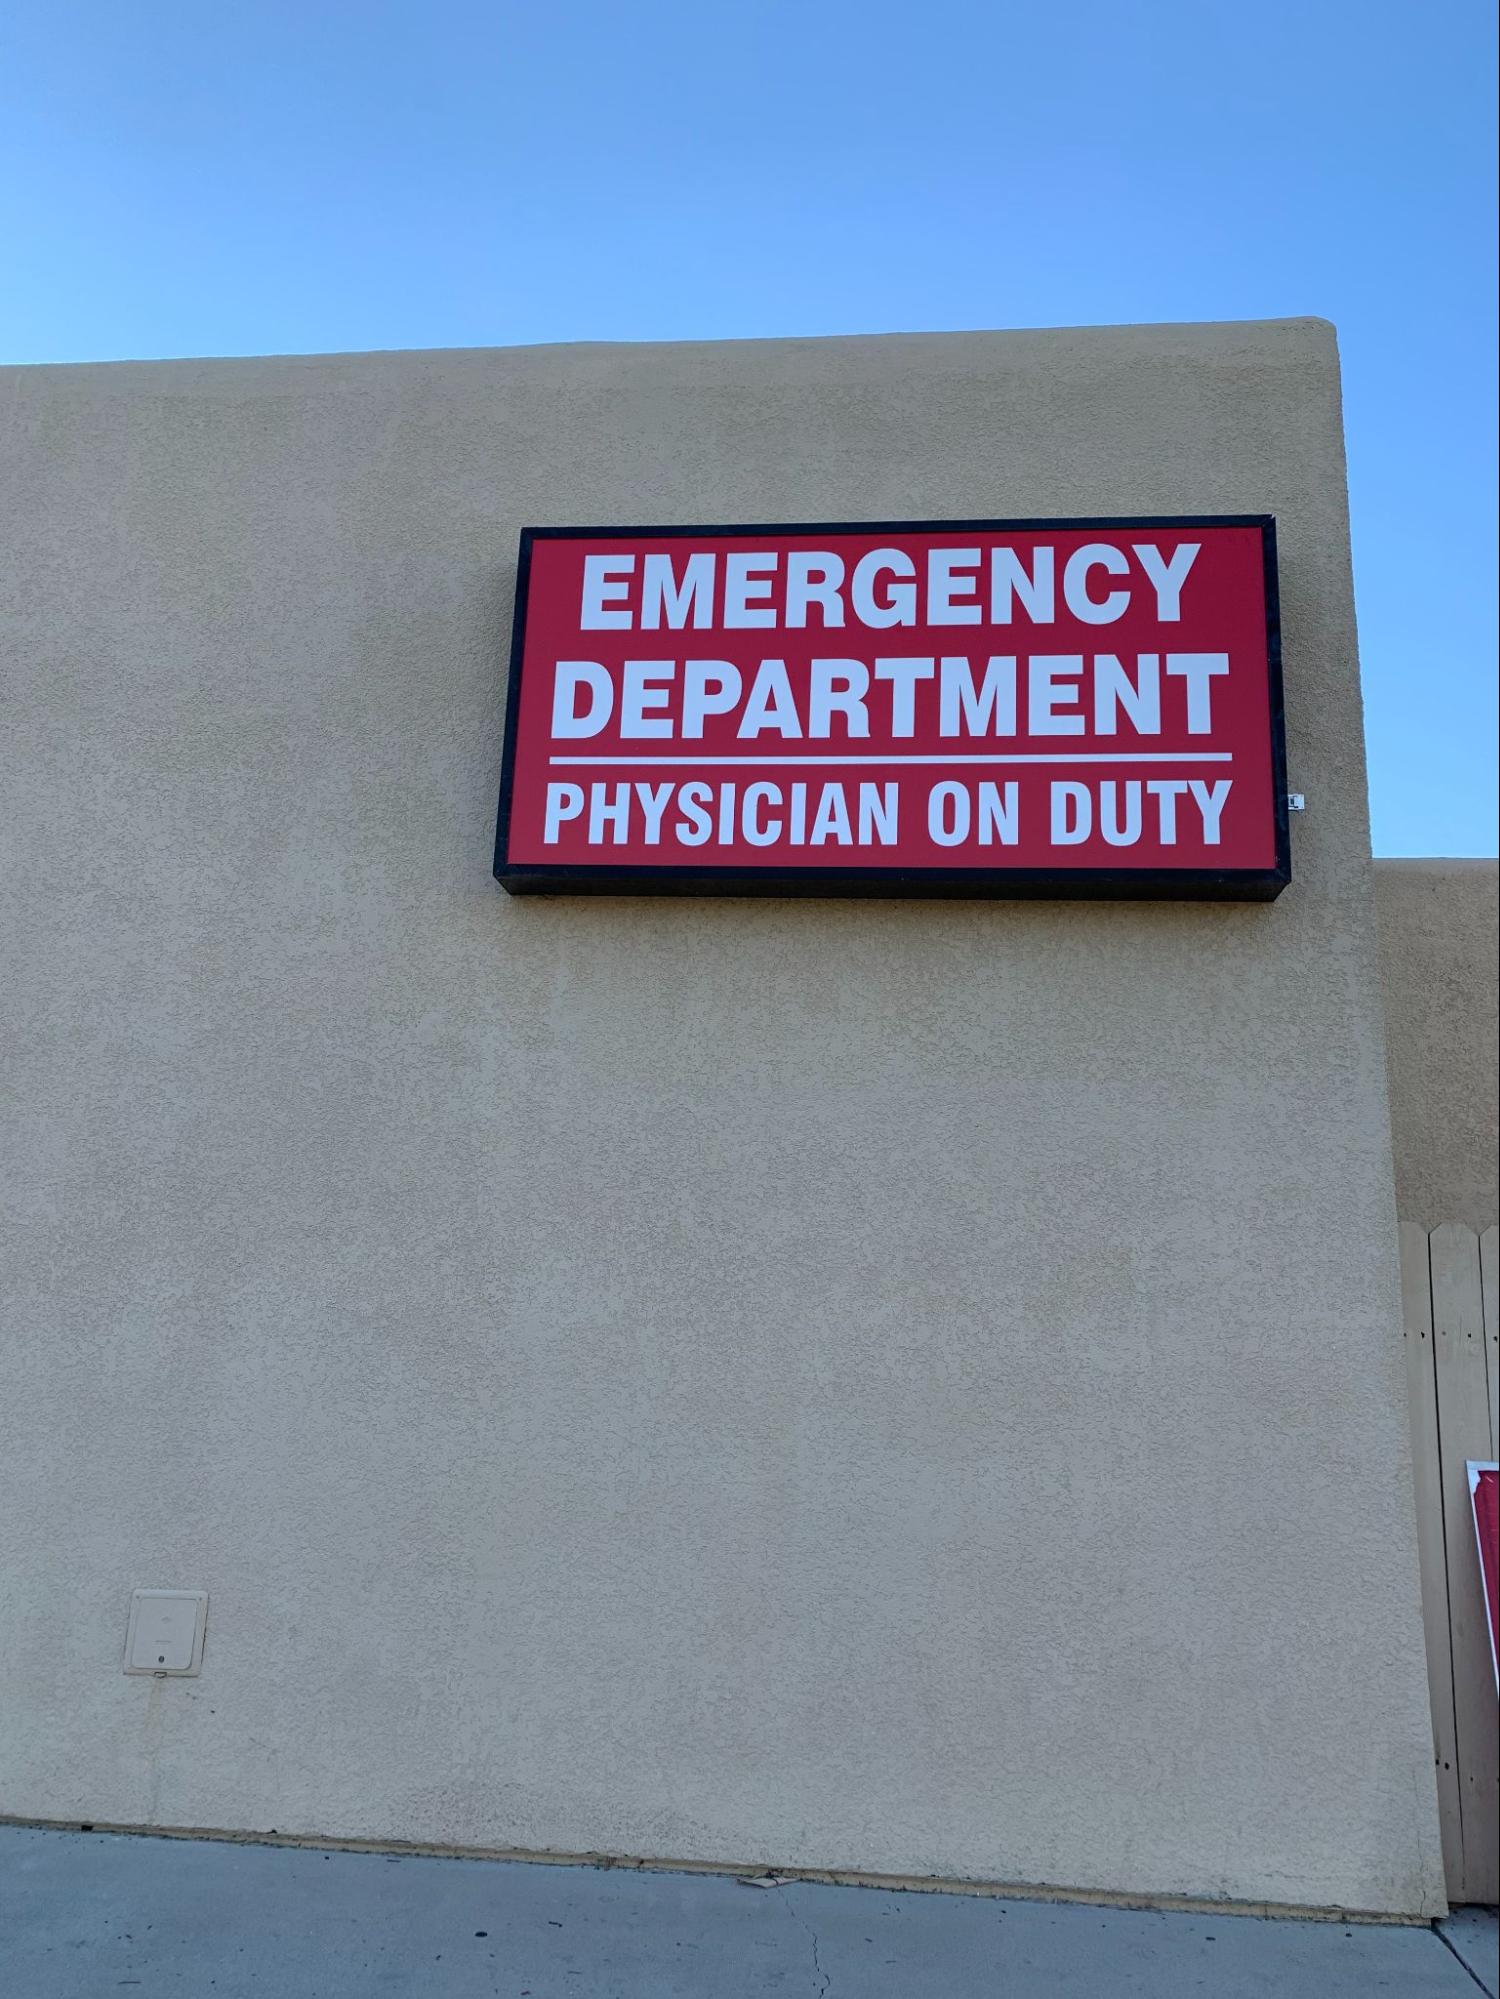 a red and white emergency department box sign.